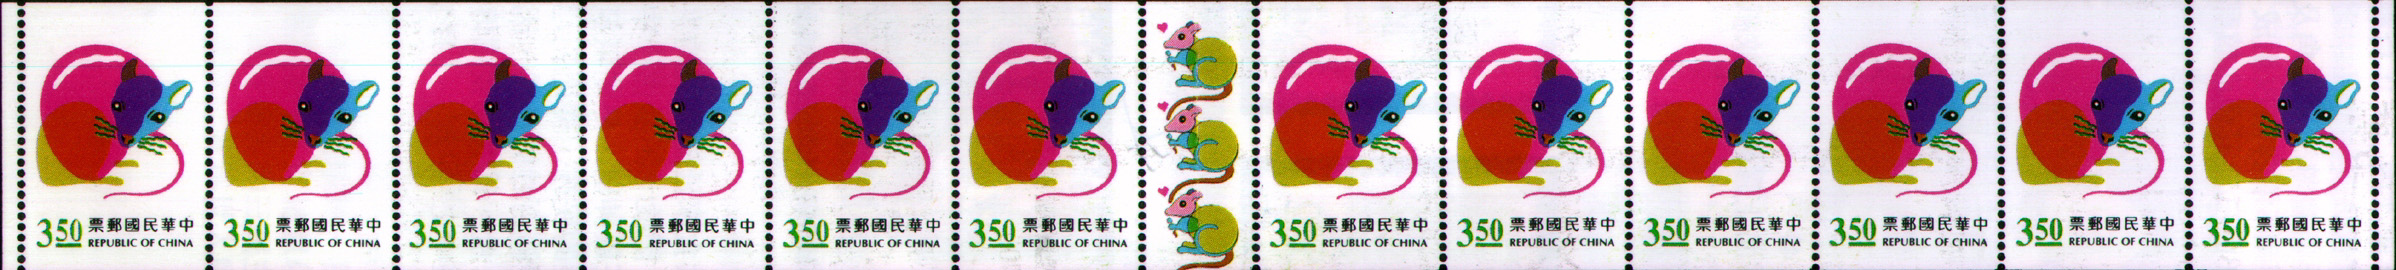 (S352.4)Special 352 New Year’s Greeting Postage Stamps (Issue of 1995)